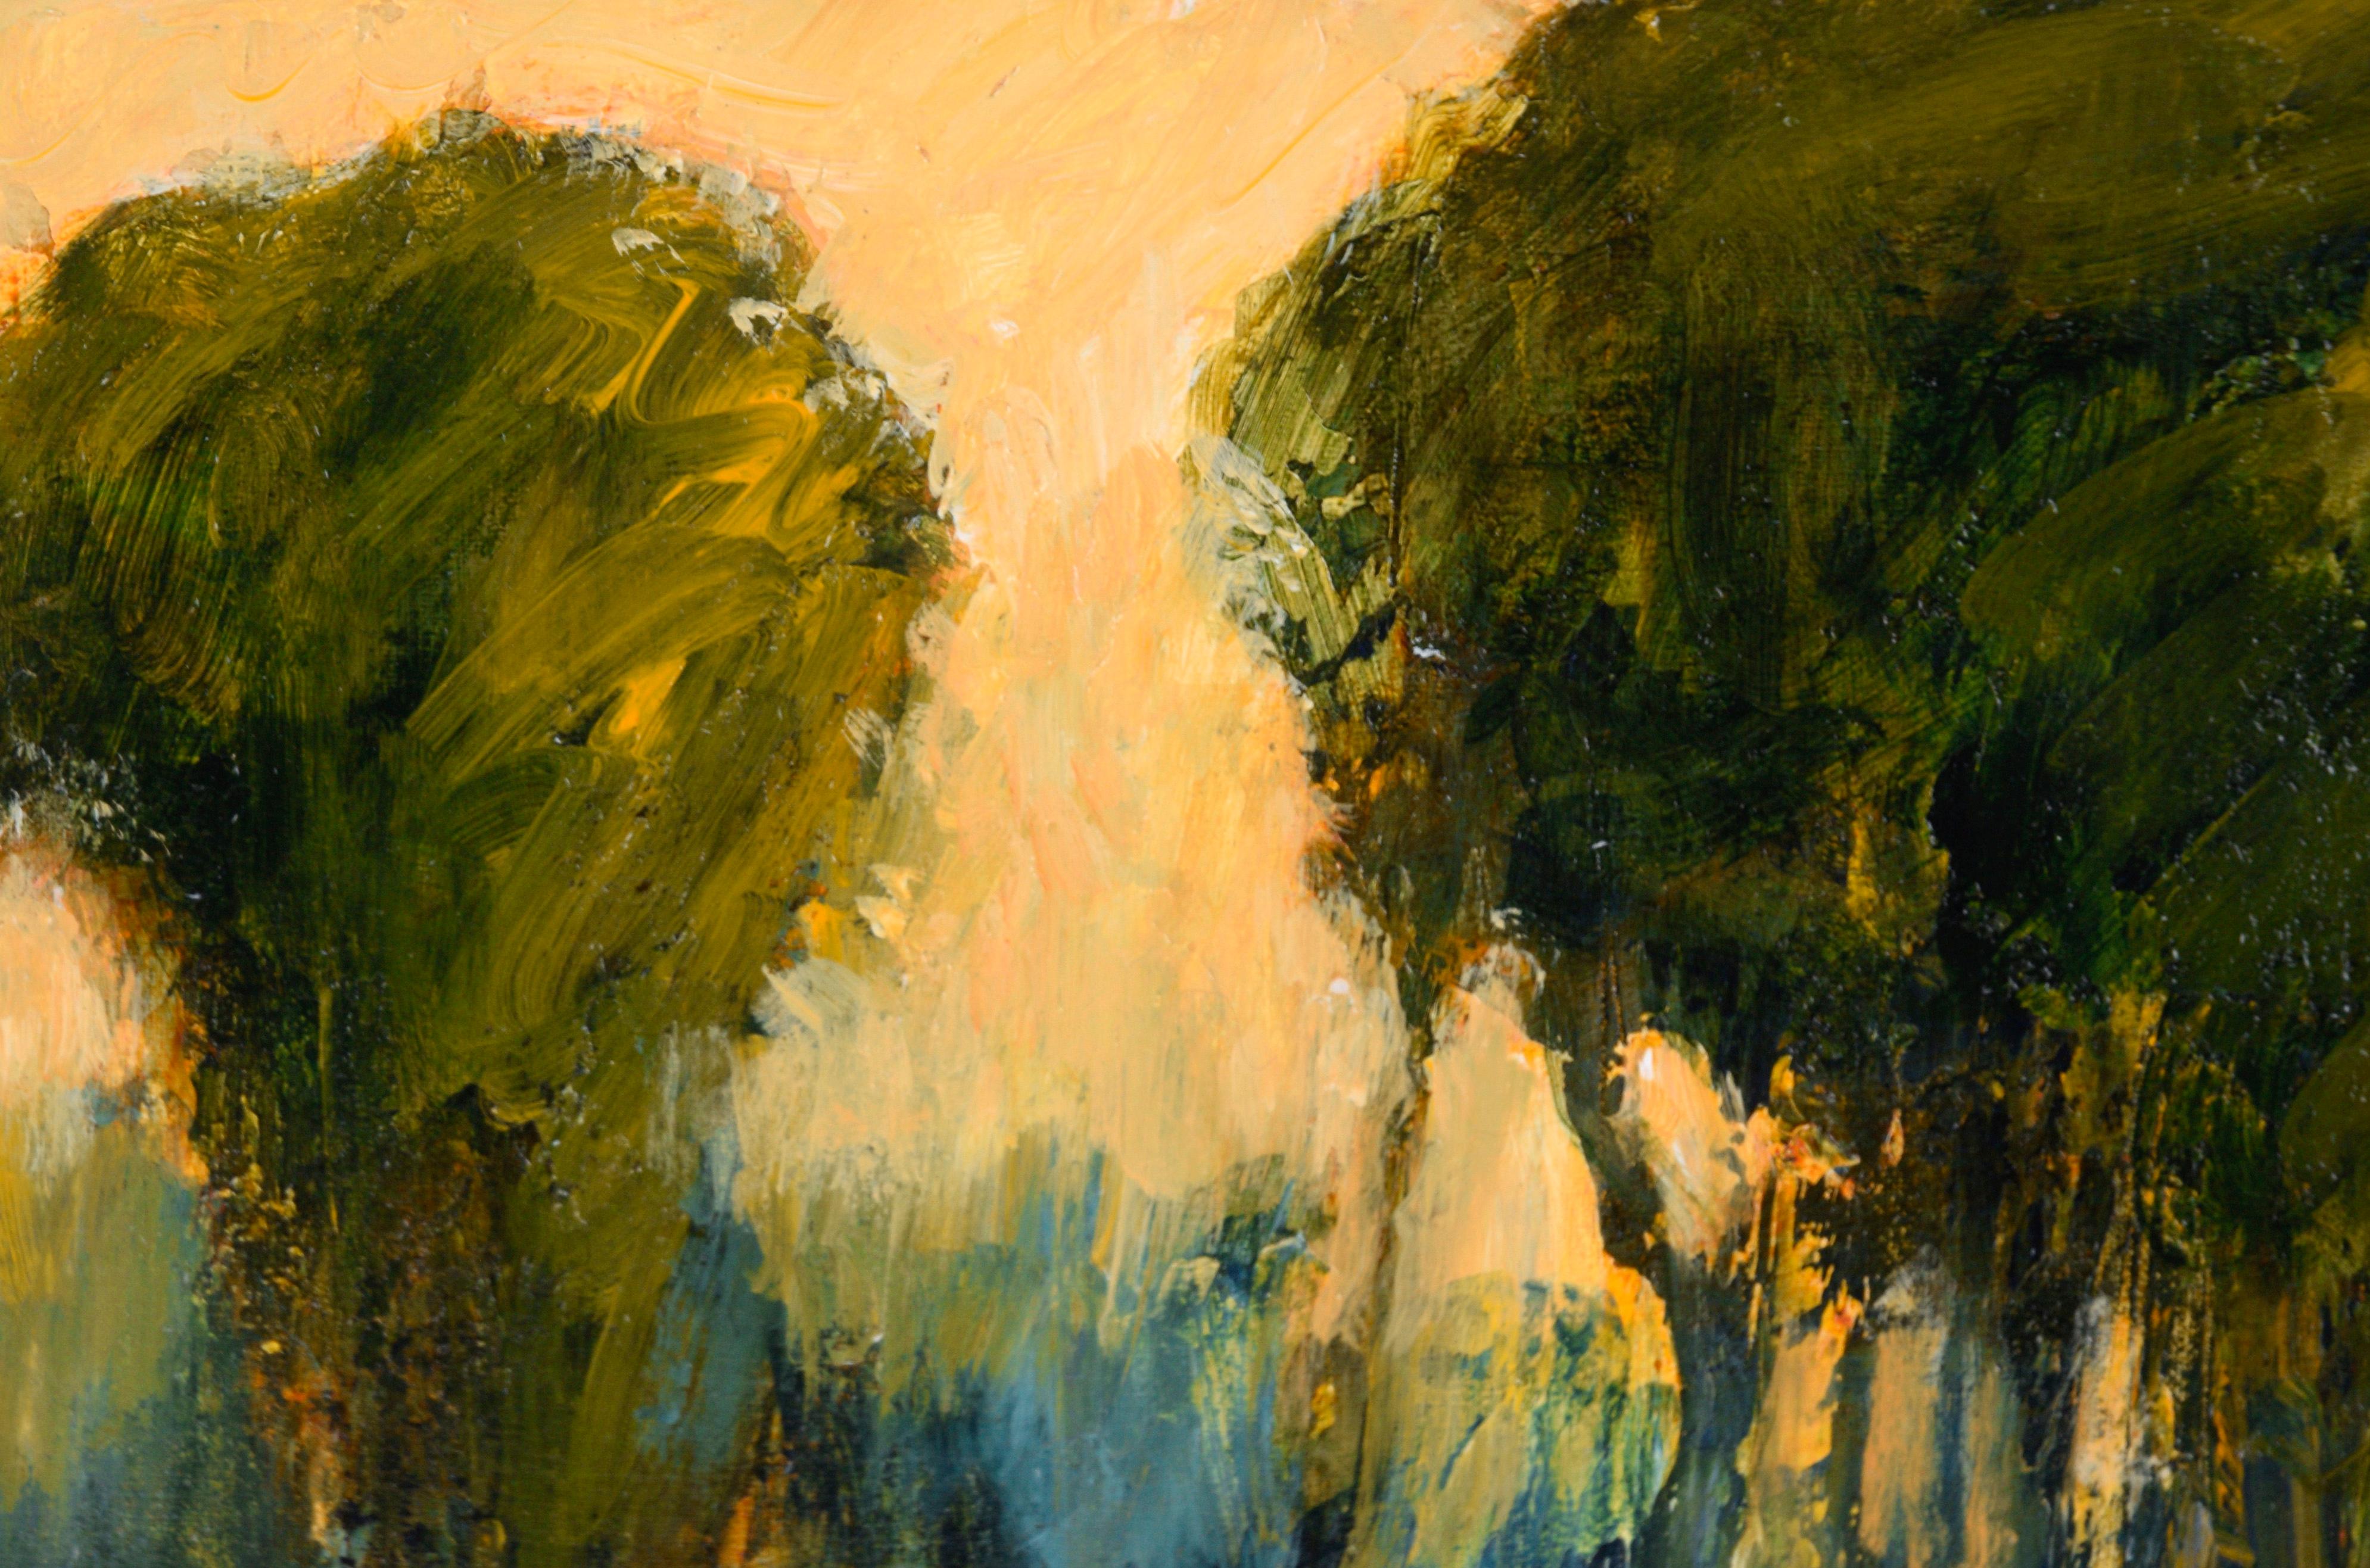 Trees by the Pond at Sunset - Landscape in Acrylic on Artist's Board - Painting by Bobbi Doyle-Maher